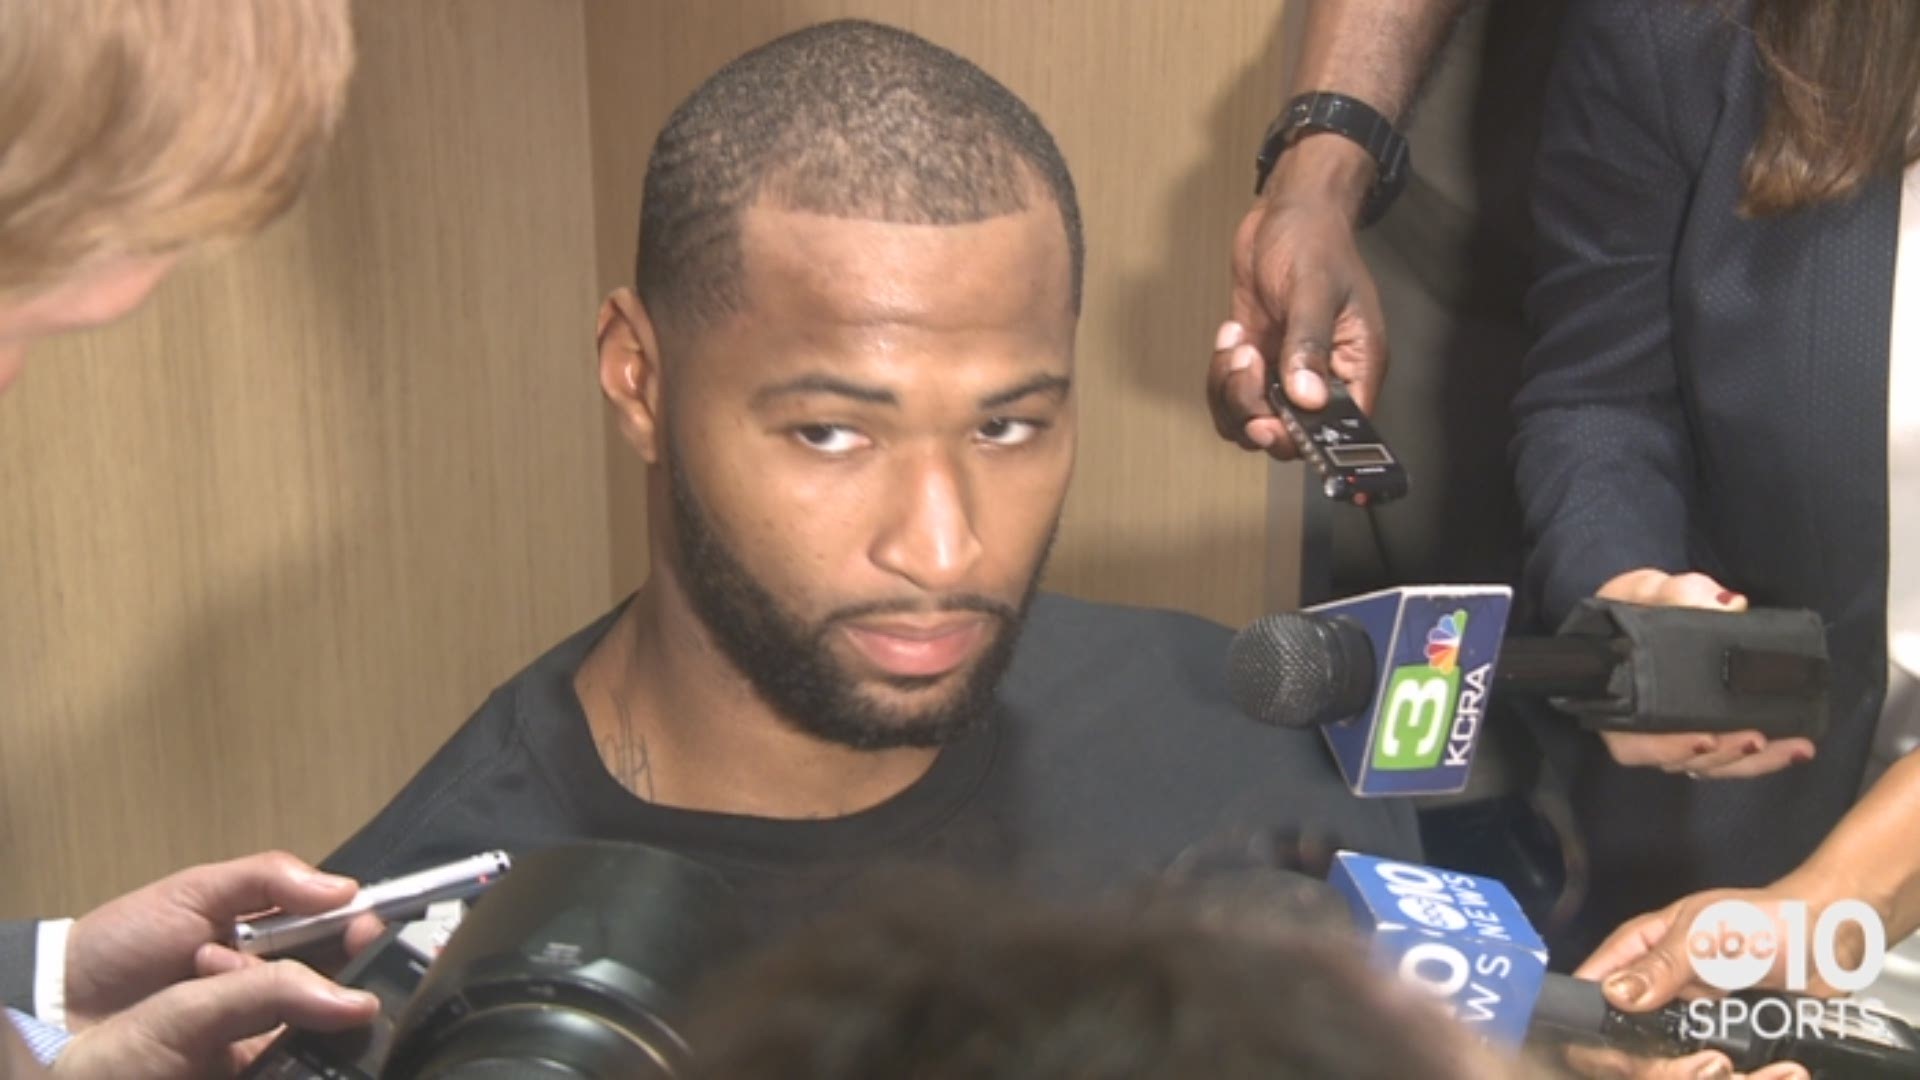 After playing in his first game in Sacramento since the trade last February, New Orleans Pelicans star DeMarcus Cousins talks about Thursday's dominant individual performance against his former Kings team after a 114-106 win.